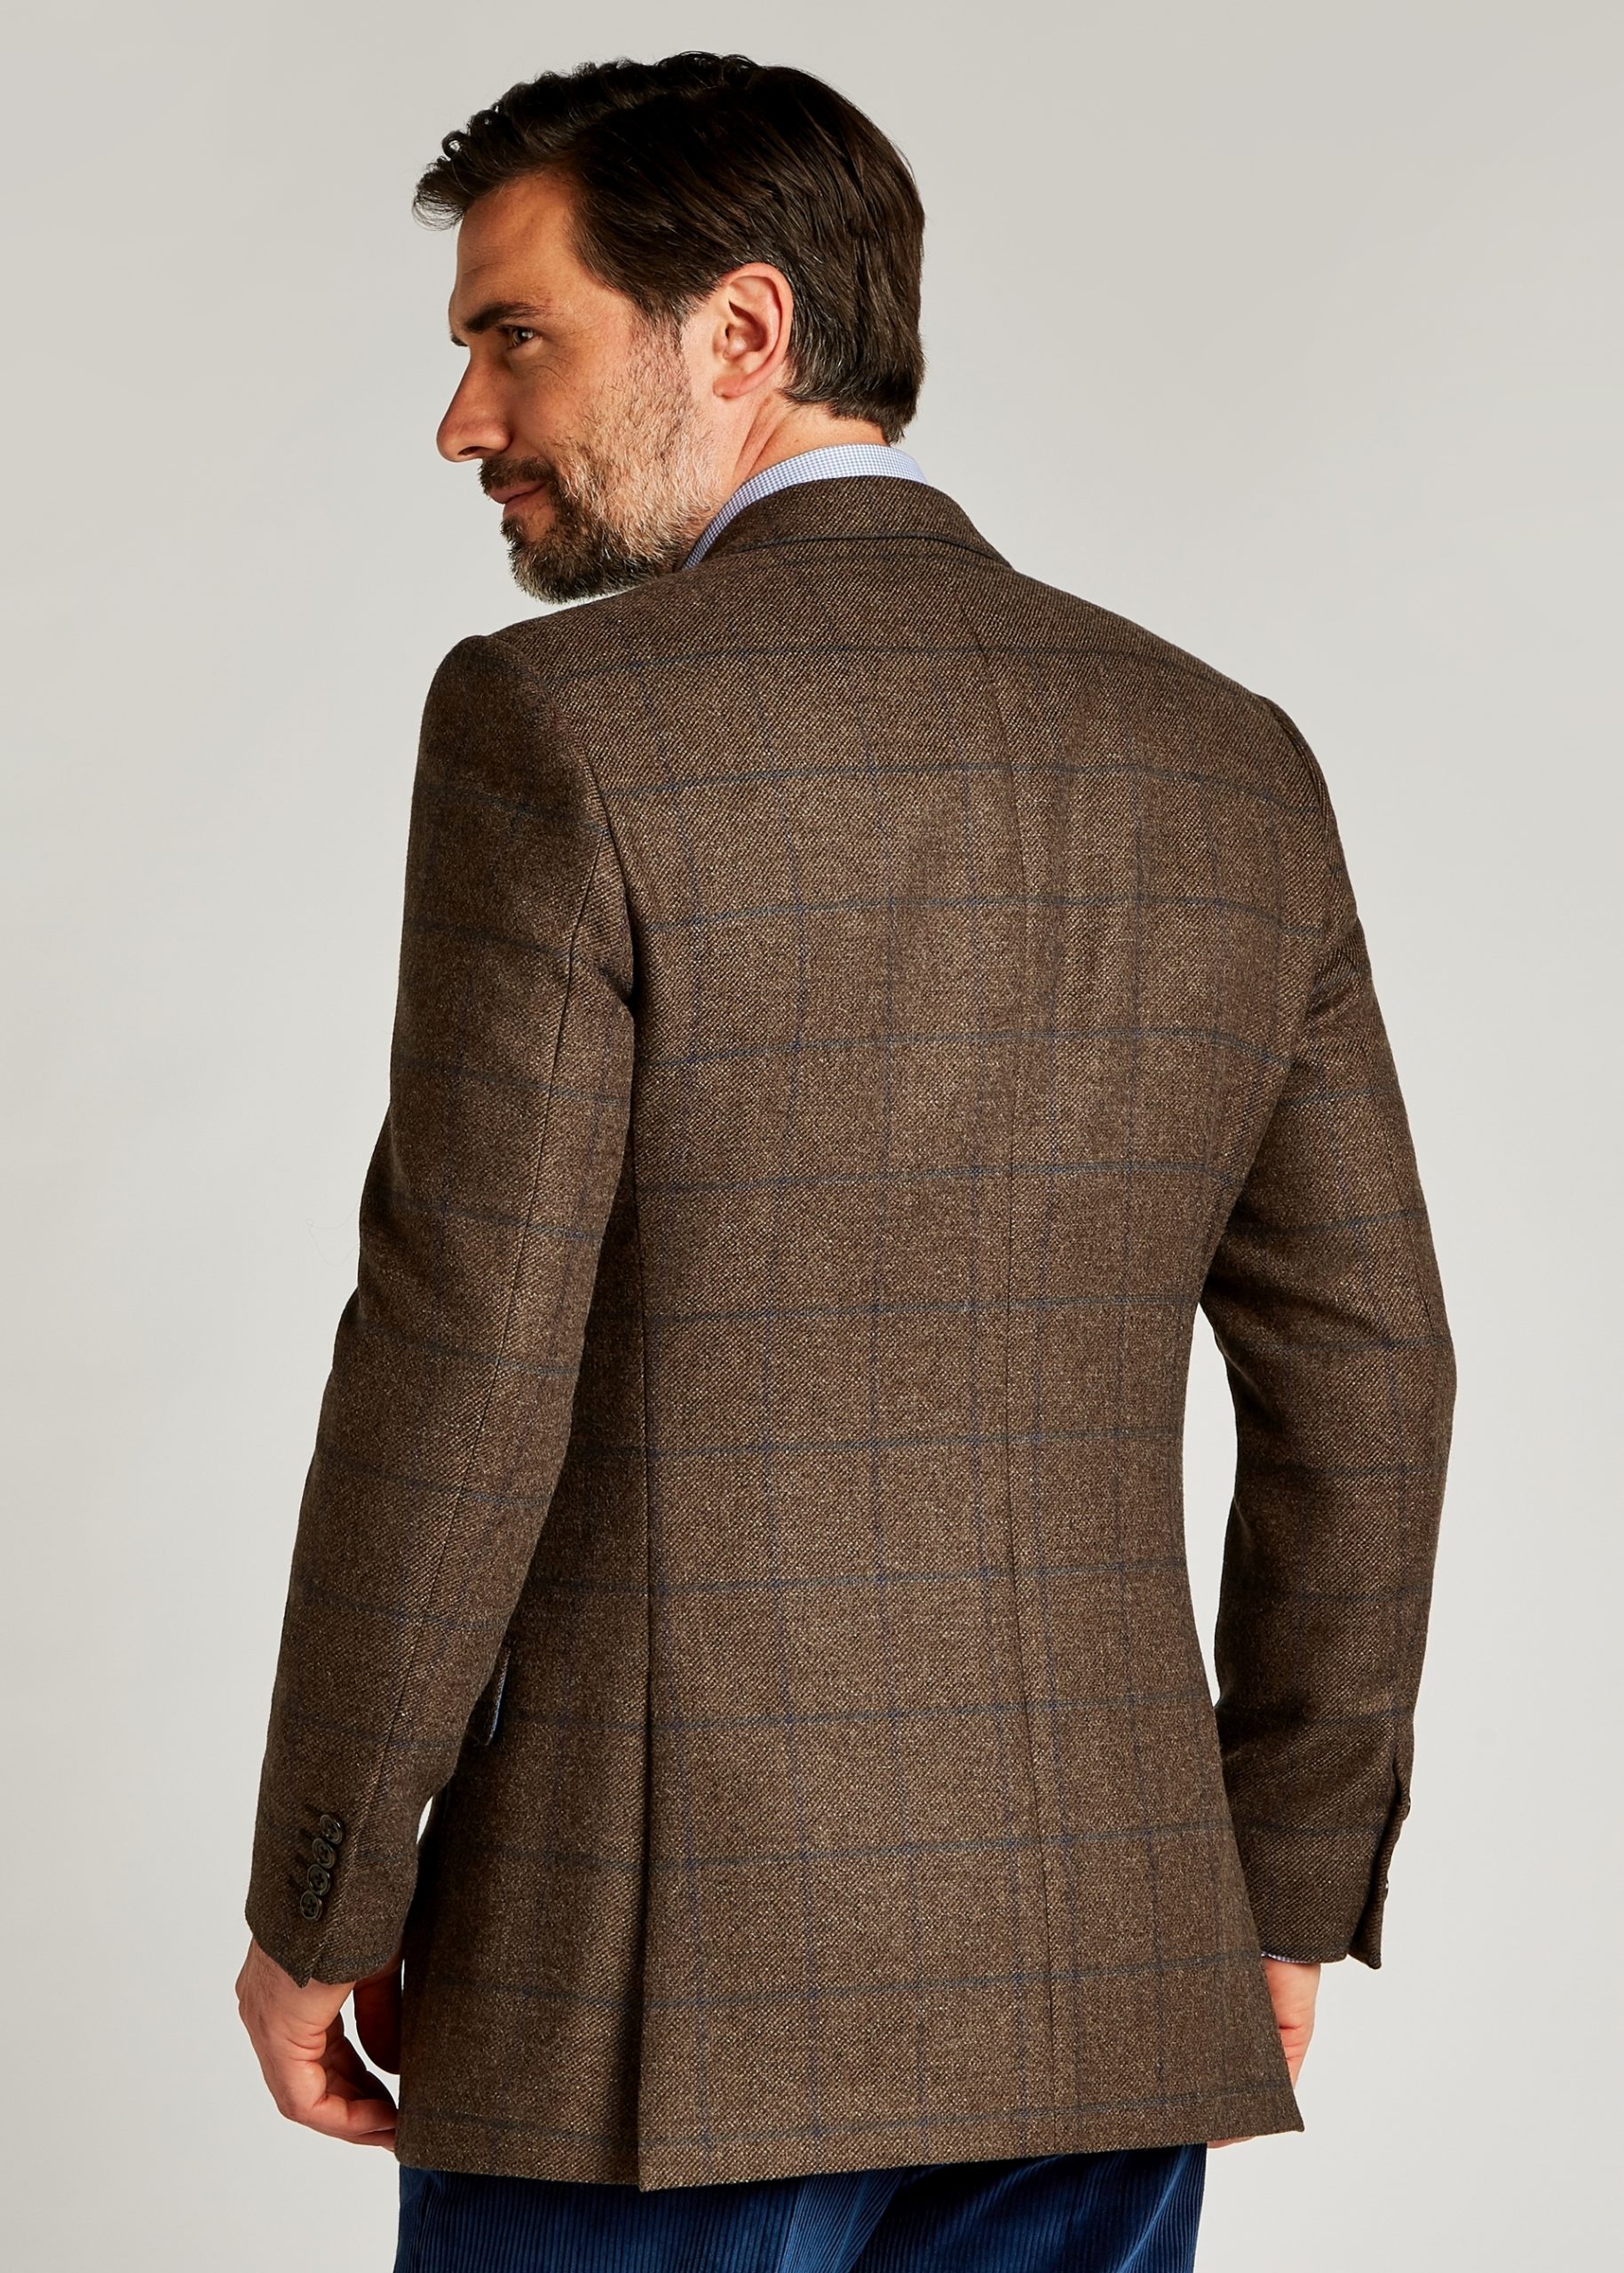 Tailored fit men’s tweed jacket with blue lining